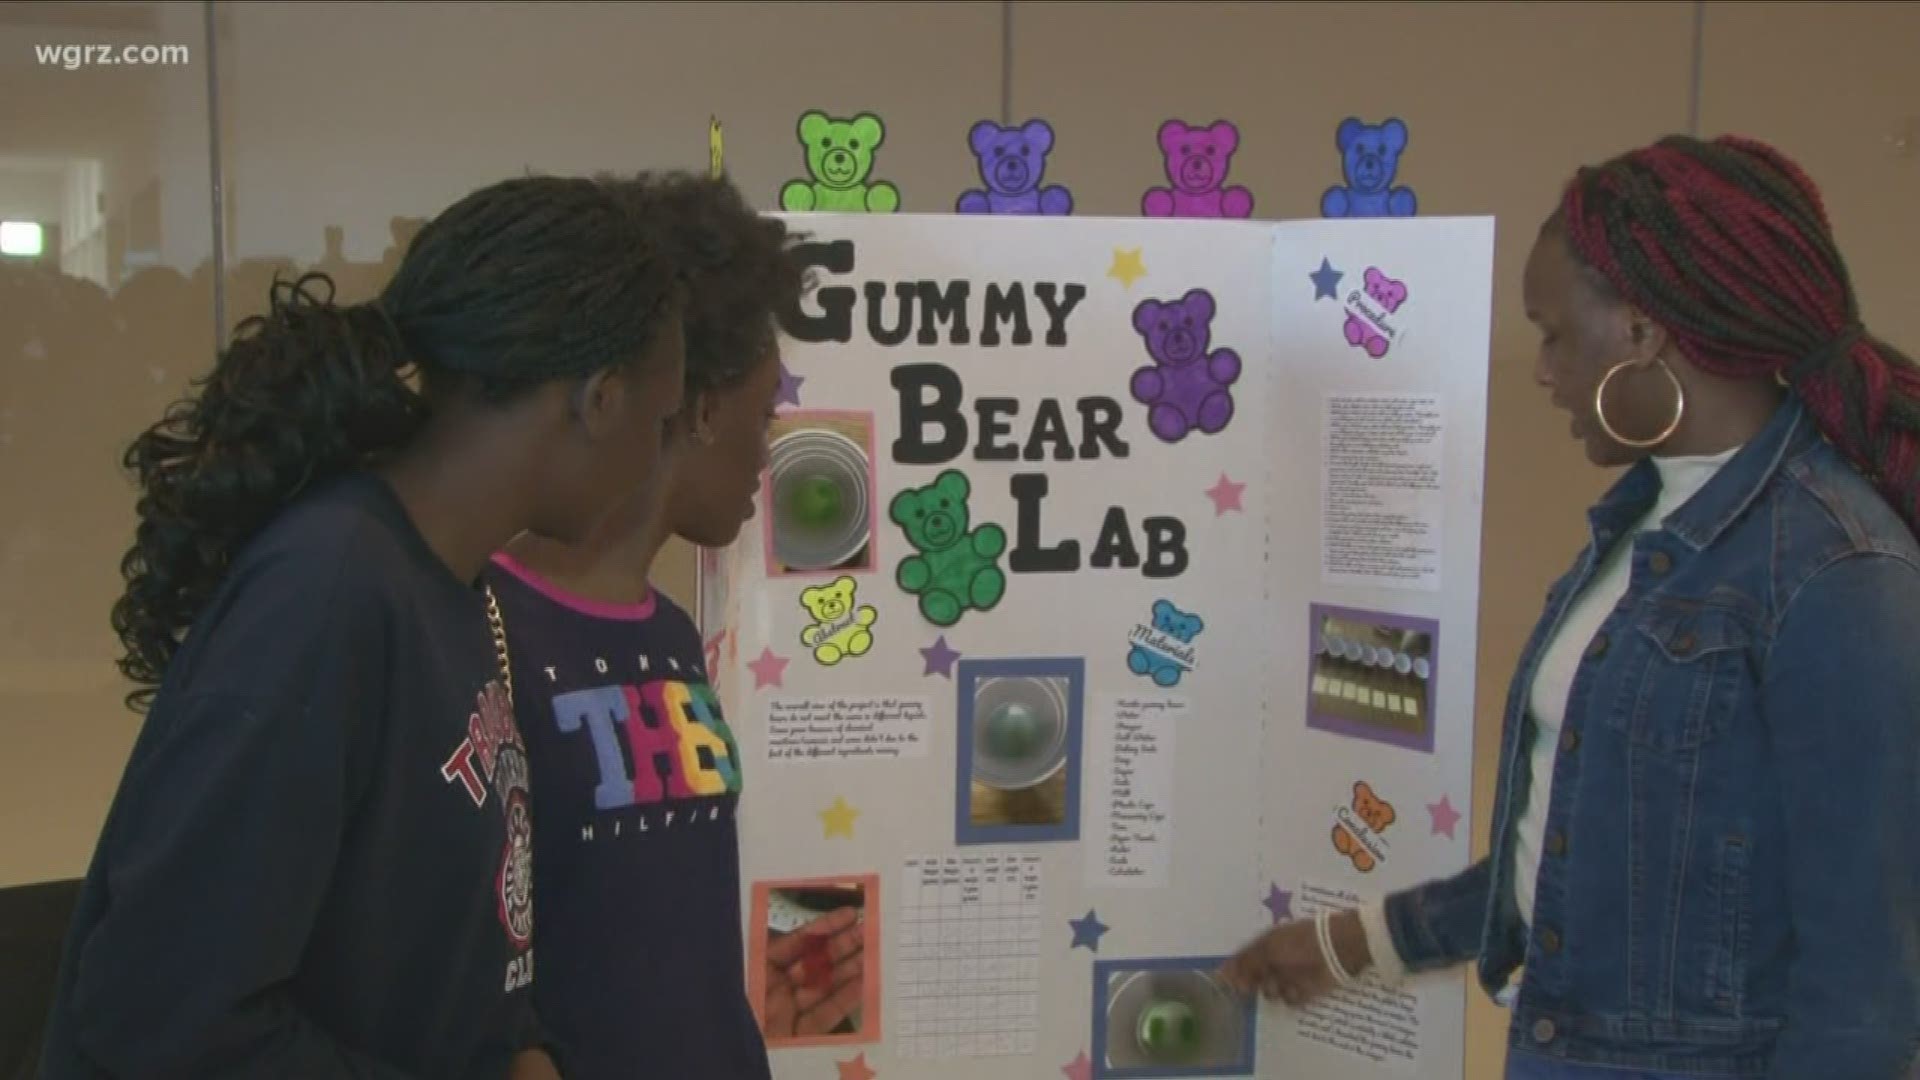 The projects at today's Willie Hutch Jones Science fair had plenty of steam.  The annual event attracted kids from across Western New York.